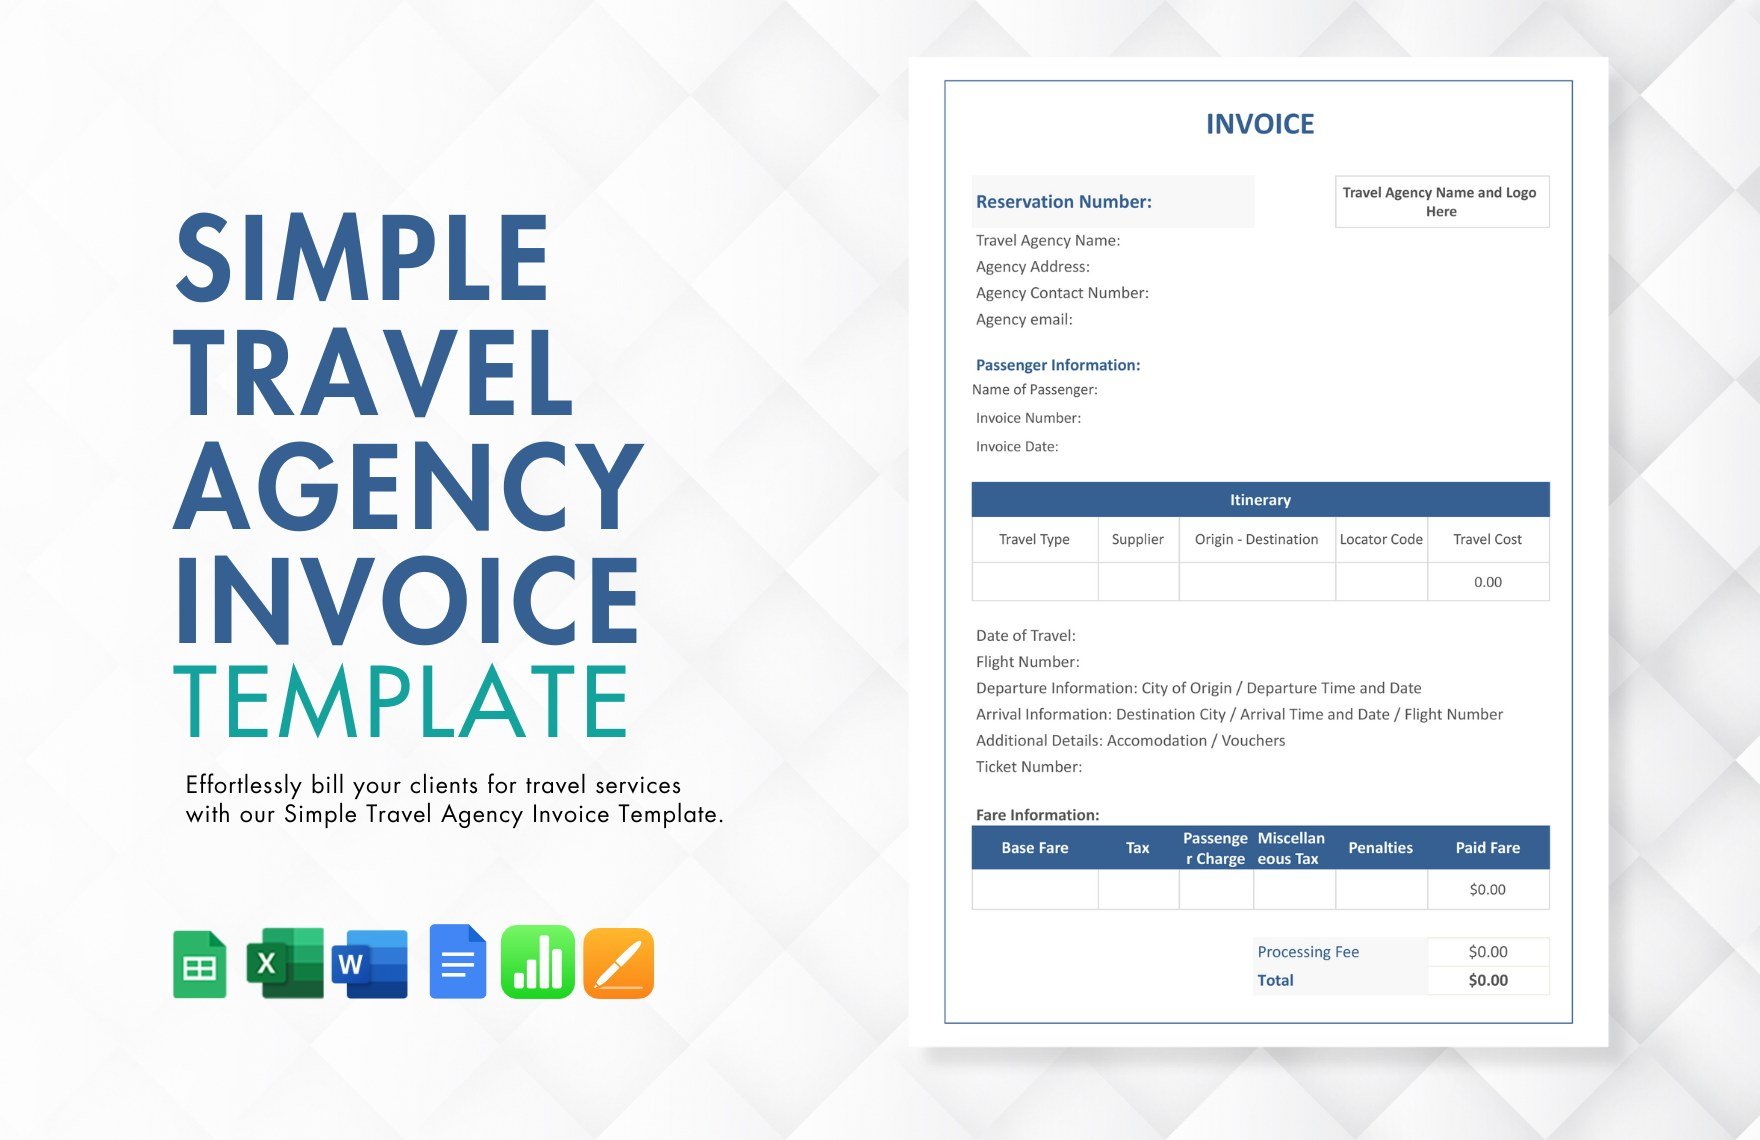 Free Simple Travel Agency Invoice Template in Word, Google Docs, Excel, Google Sheets, Apple Pages, Apple Numbers